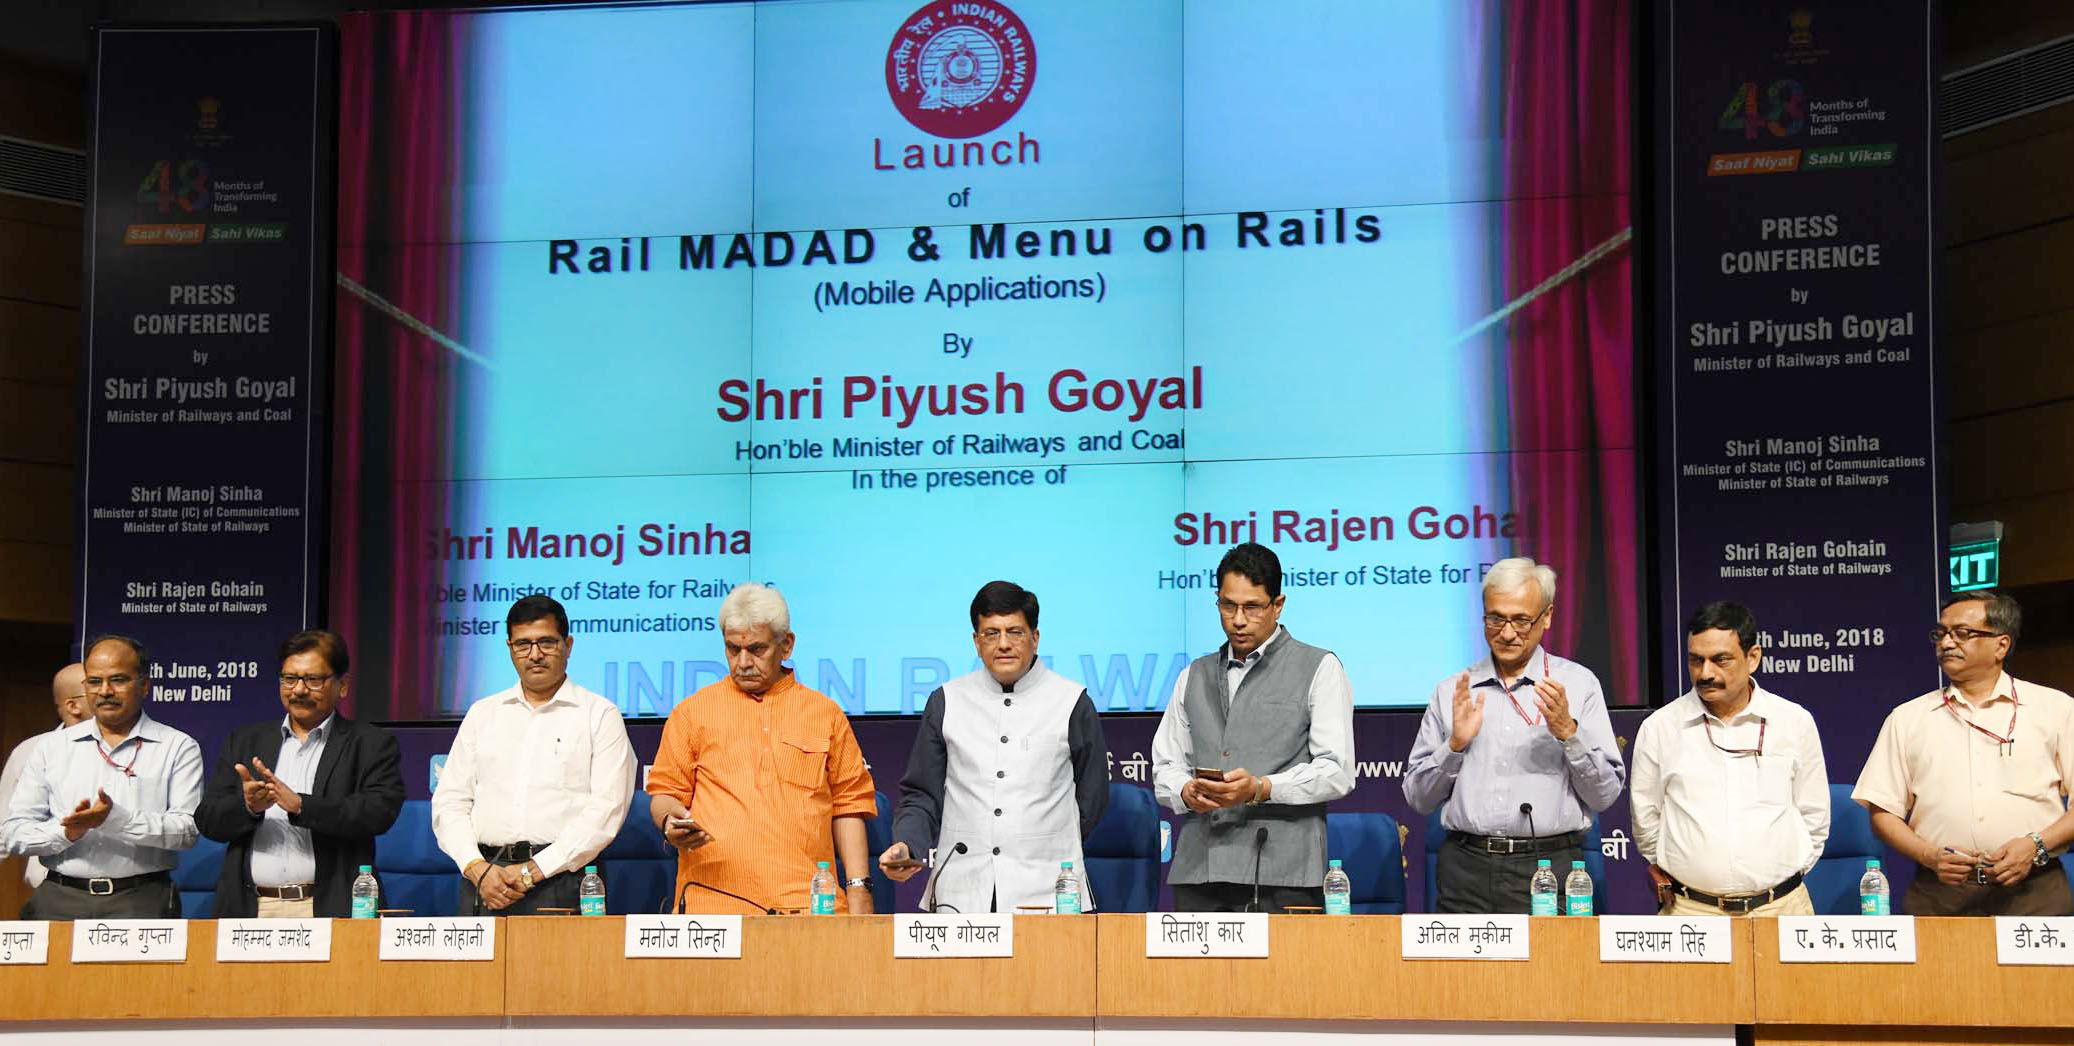 Railways Minister launched a new App Menu on Rails